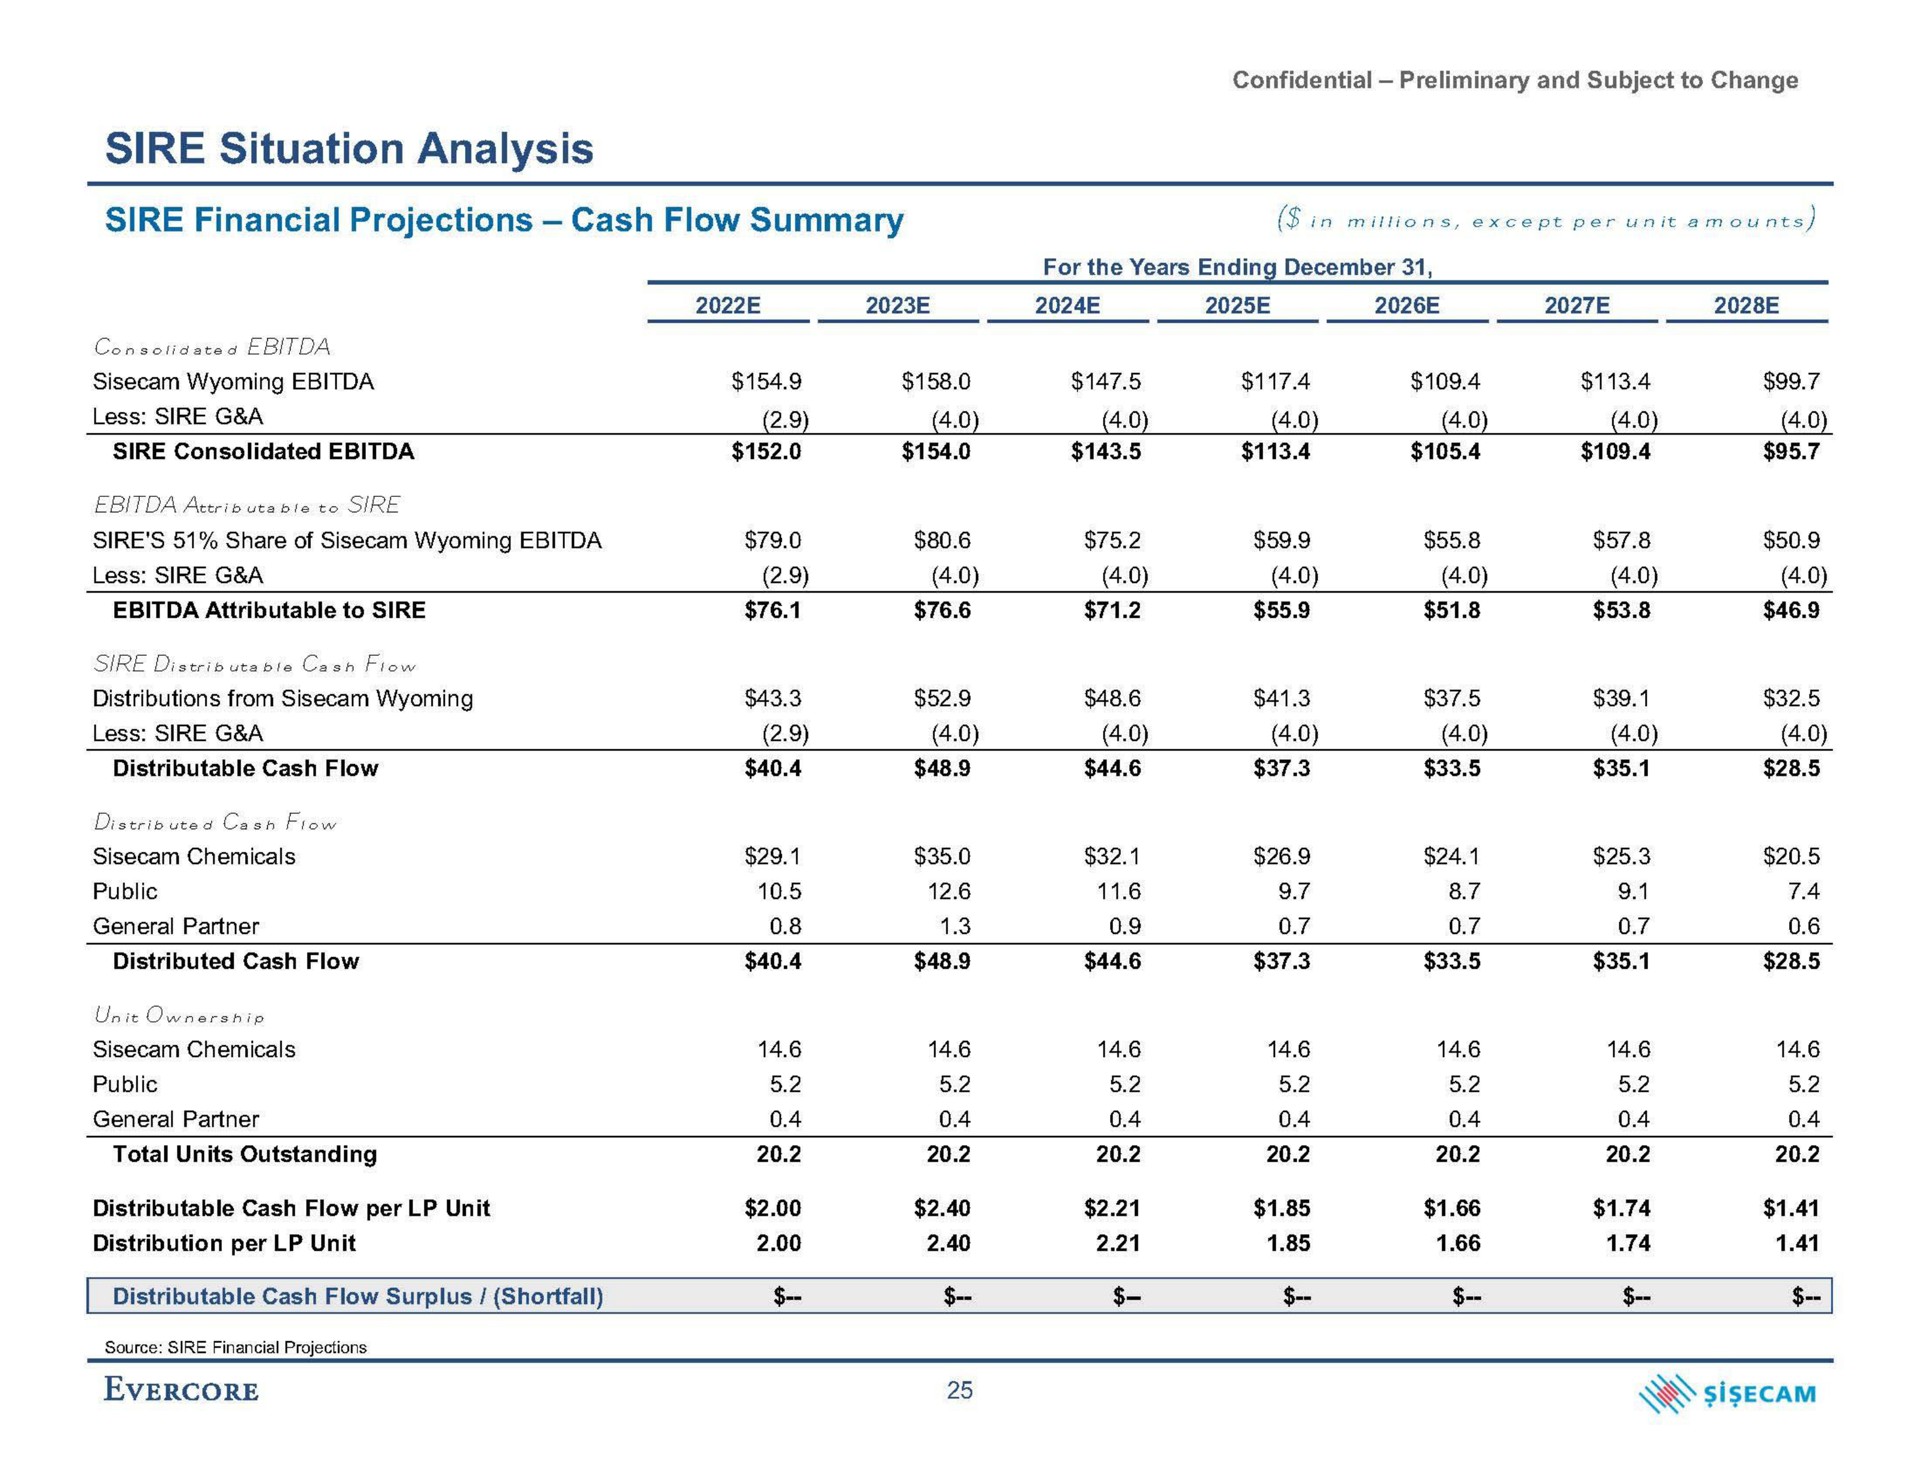 sire situation analysis sire financial projections cash flow summary in except per unit amounts less sire a less sire a | Evercore